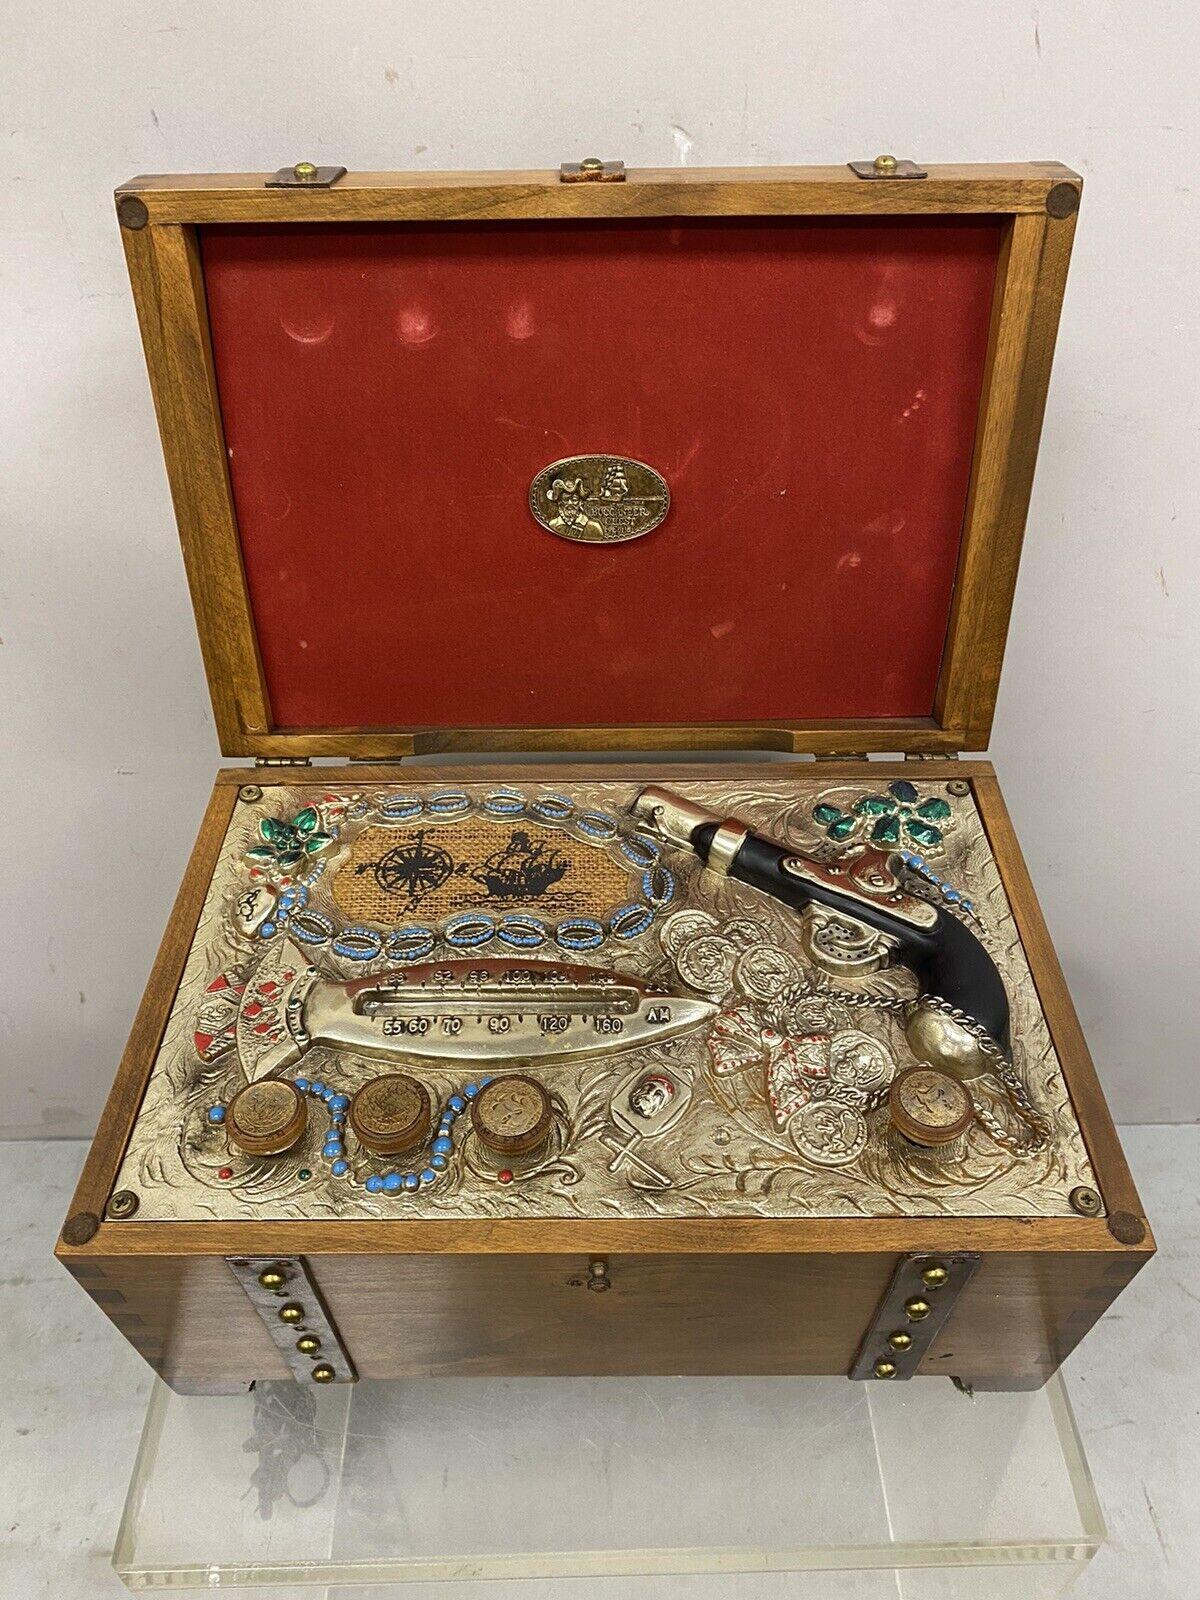 The Buccaneer chest by Guild Vintage AM/FM radio pirate treasure chest radio. Circa mid to late 20th century. Measurements: 11